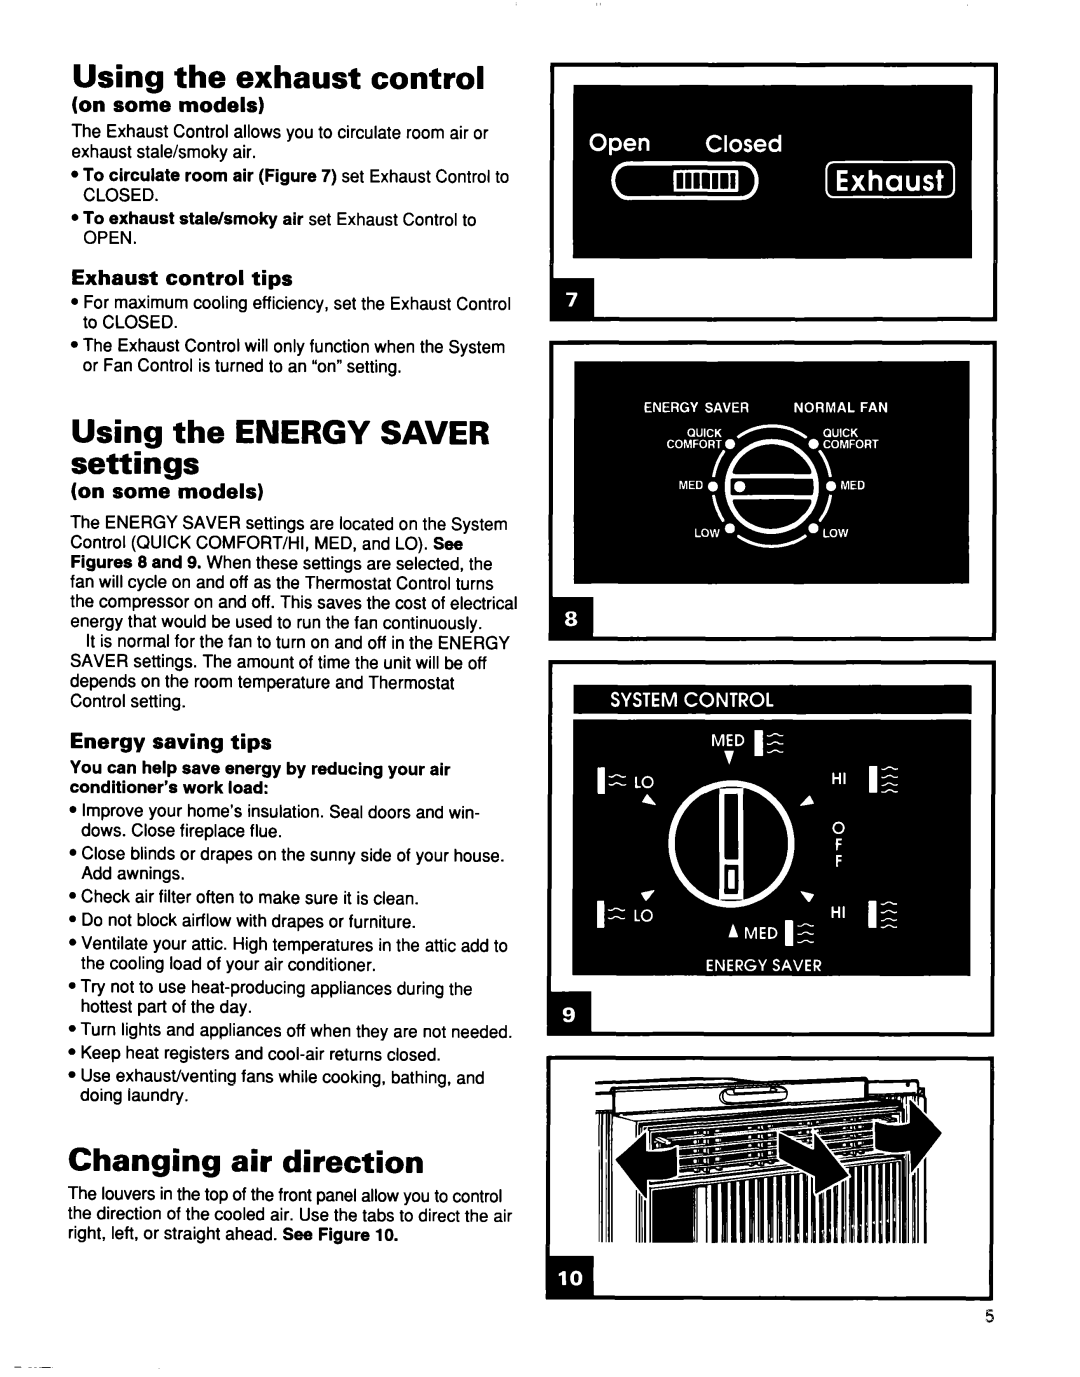 Whirlpool TA07002F0 Using the exhaust control, Using the ENERGY SAVER settings, Changing air direction, on some models 